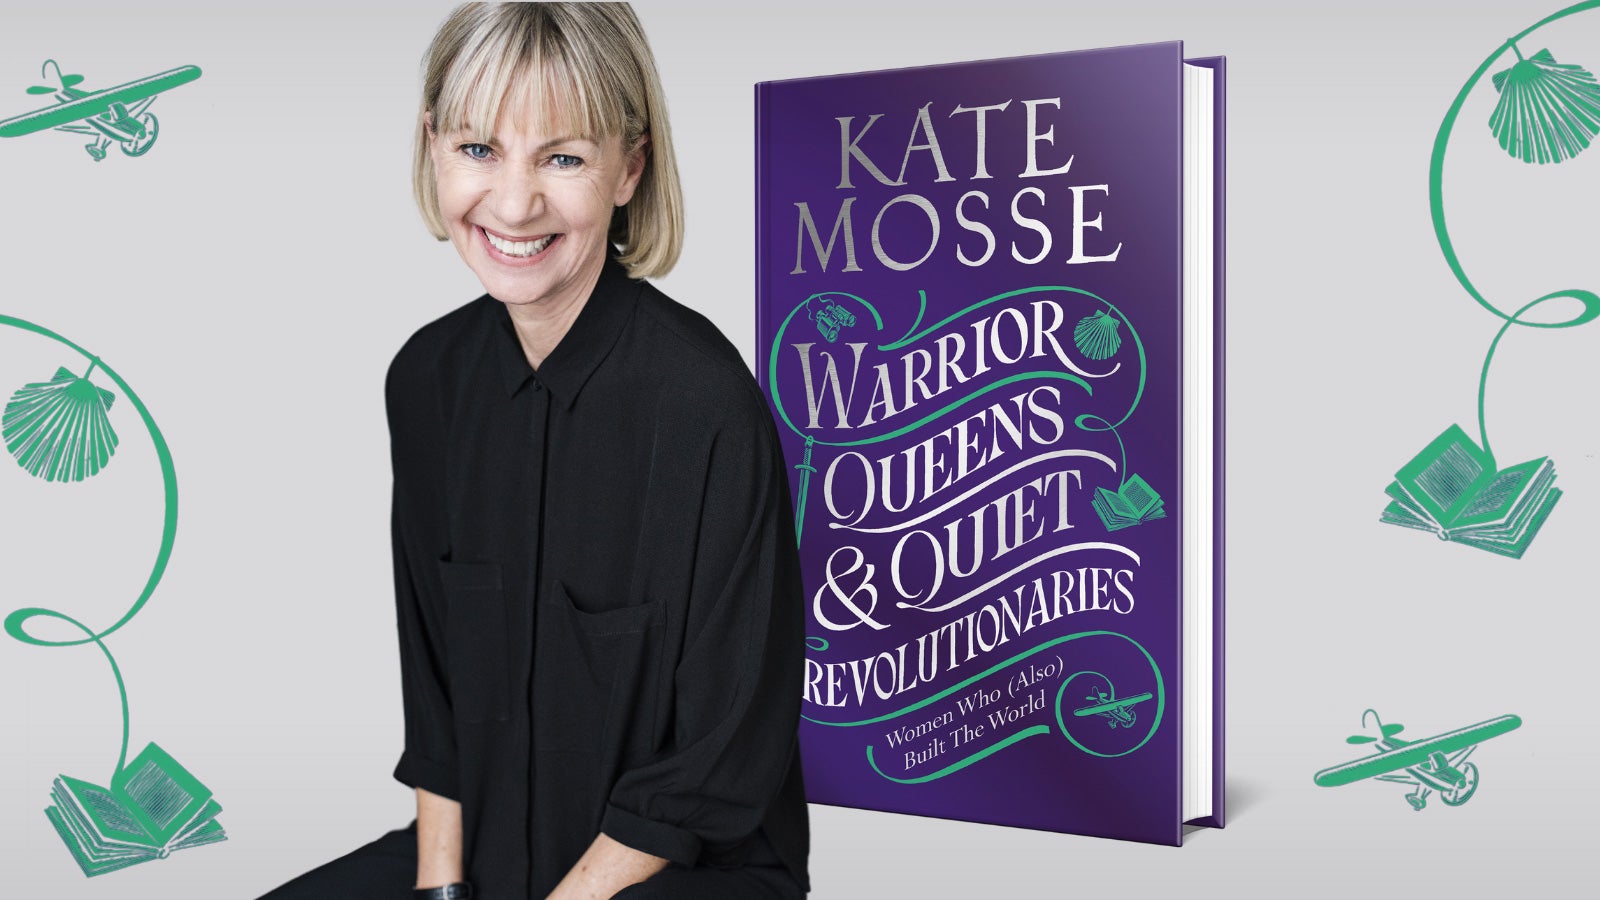 Kate Mosse smiles to camera, behind her is the image of her new book cover 'Warrior Queens & Quiet Revolutionaries'